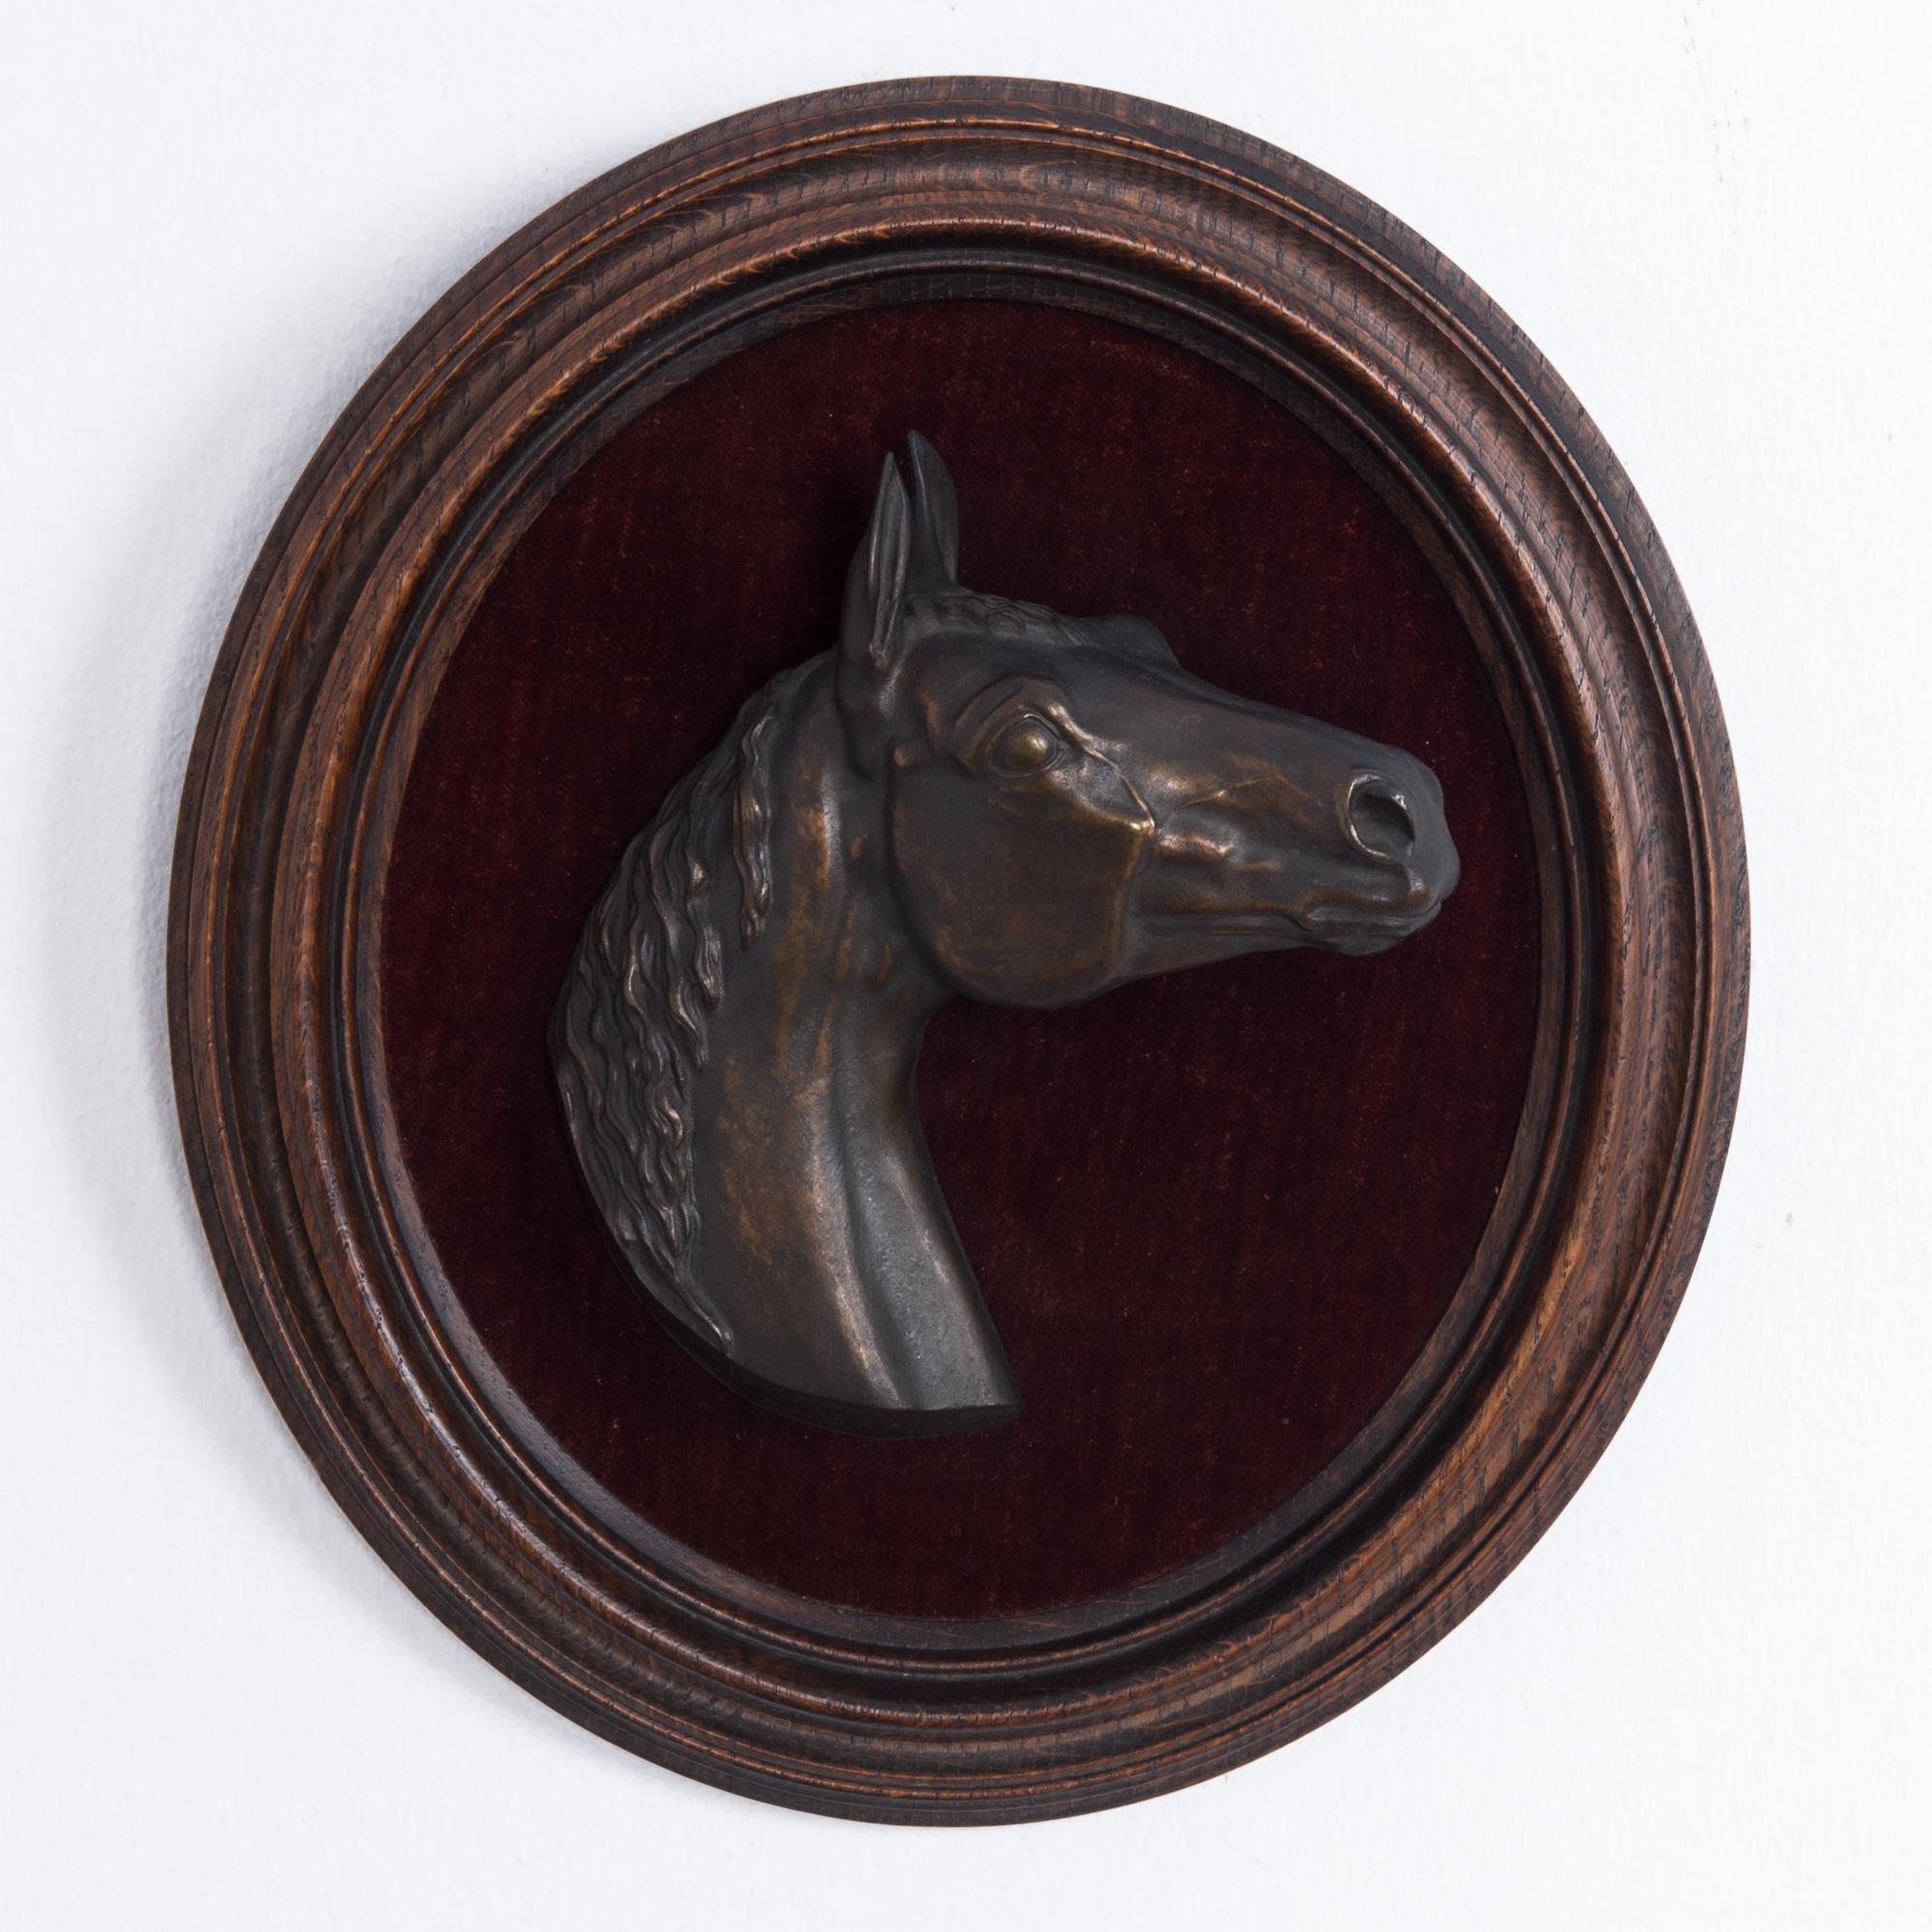 This relief of a horse’s head was made in France in 1864, intricately sculpted and cast in bronze. It comes set in an oval wooden frame with molding and will be an impressive feature in any interior space with its realistic rendering and elegant